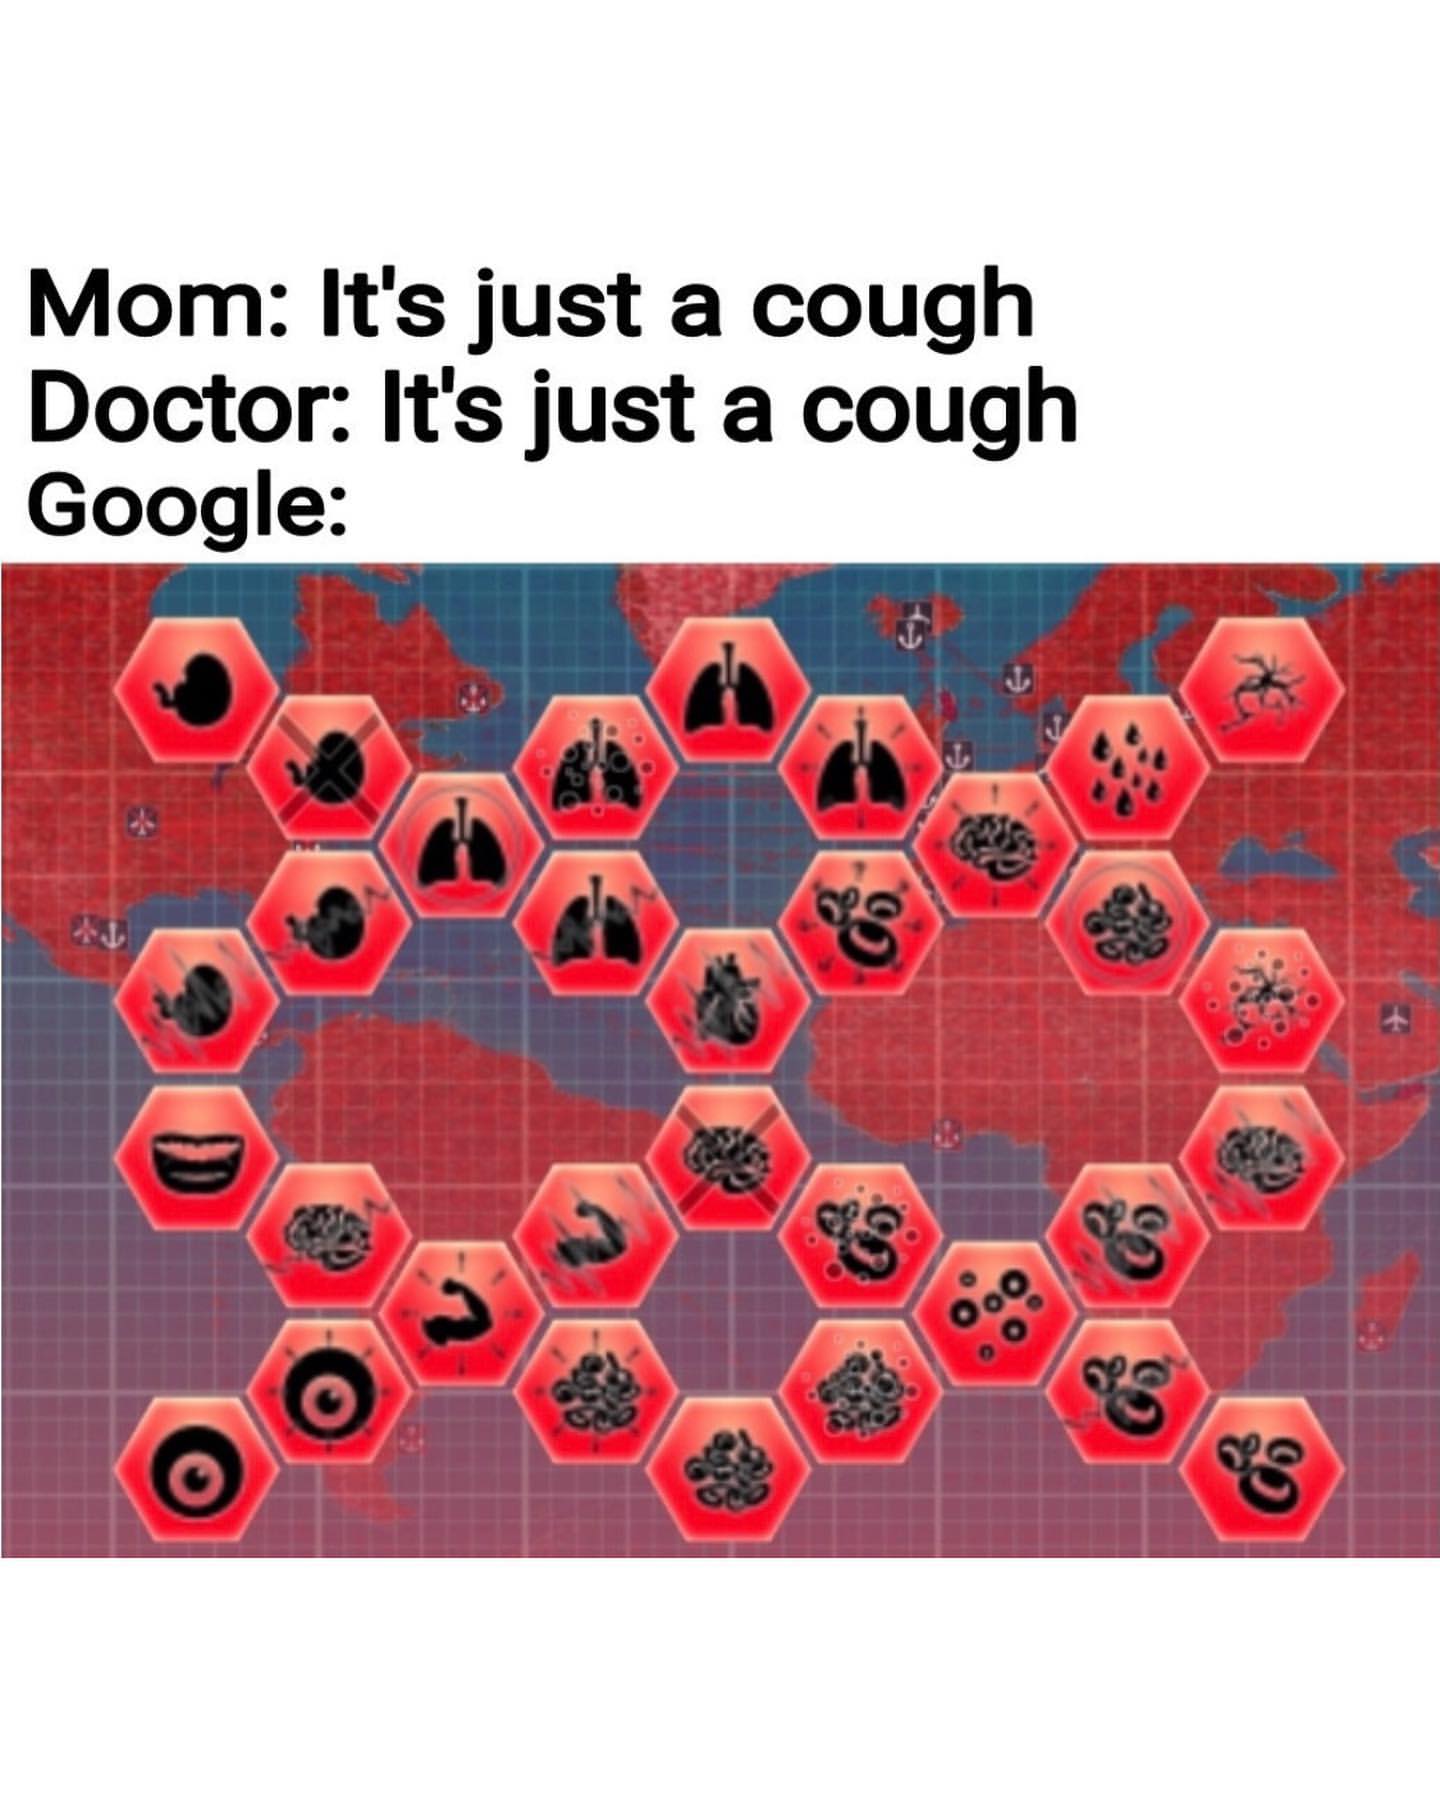 Mom: It's just a cough. Doctor: It's just a cough. Google: